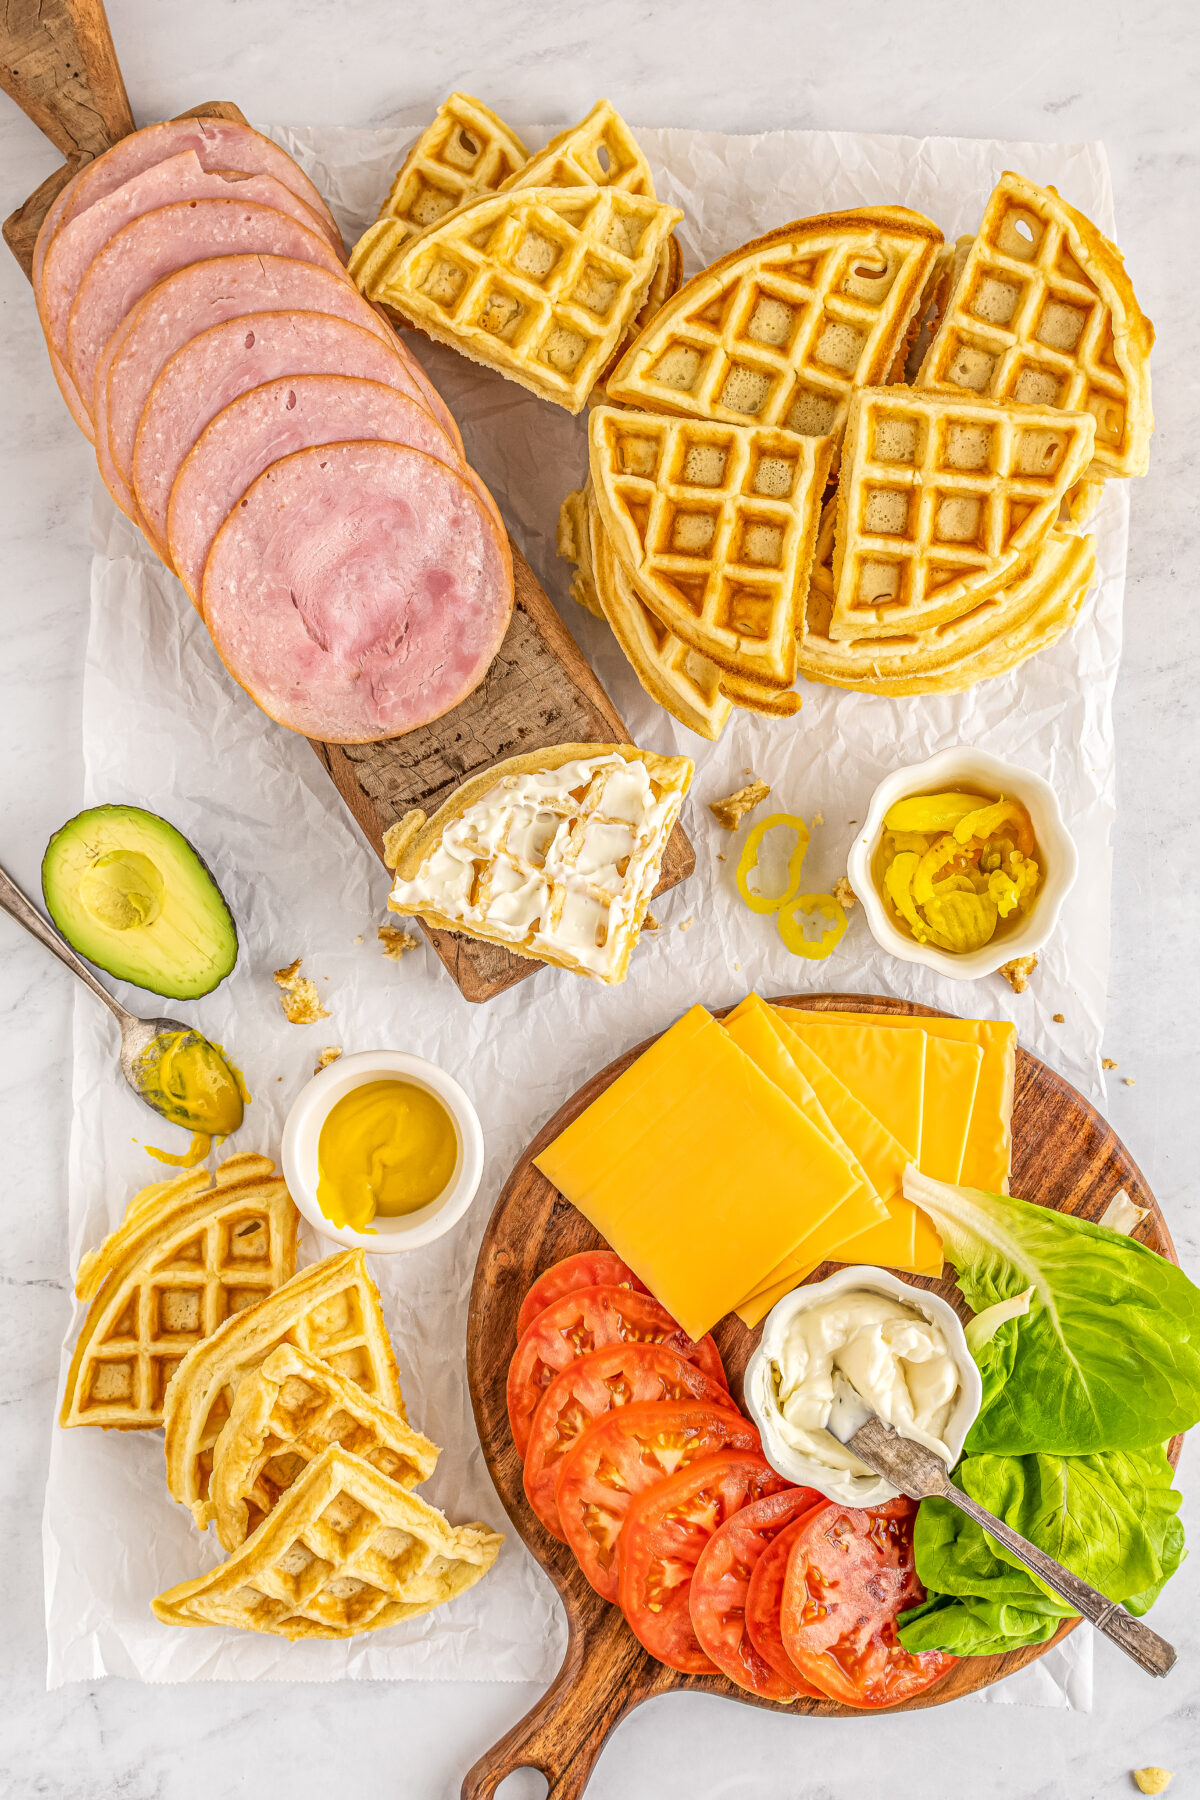 Mayo spread over a quarter of a waffle with other filling ingredients and waffle quarters laid out.